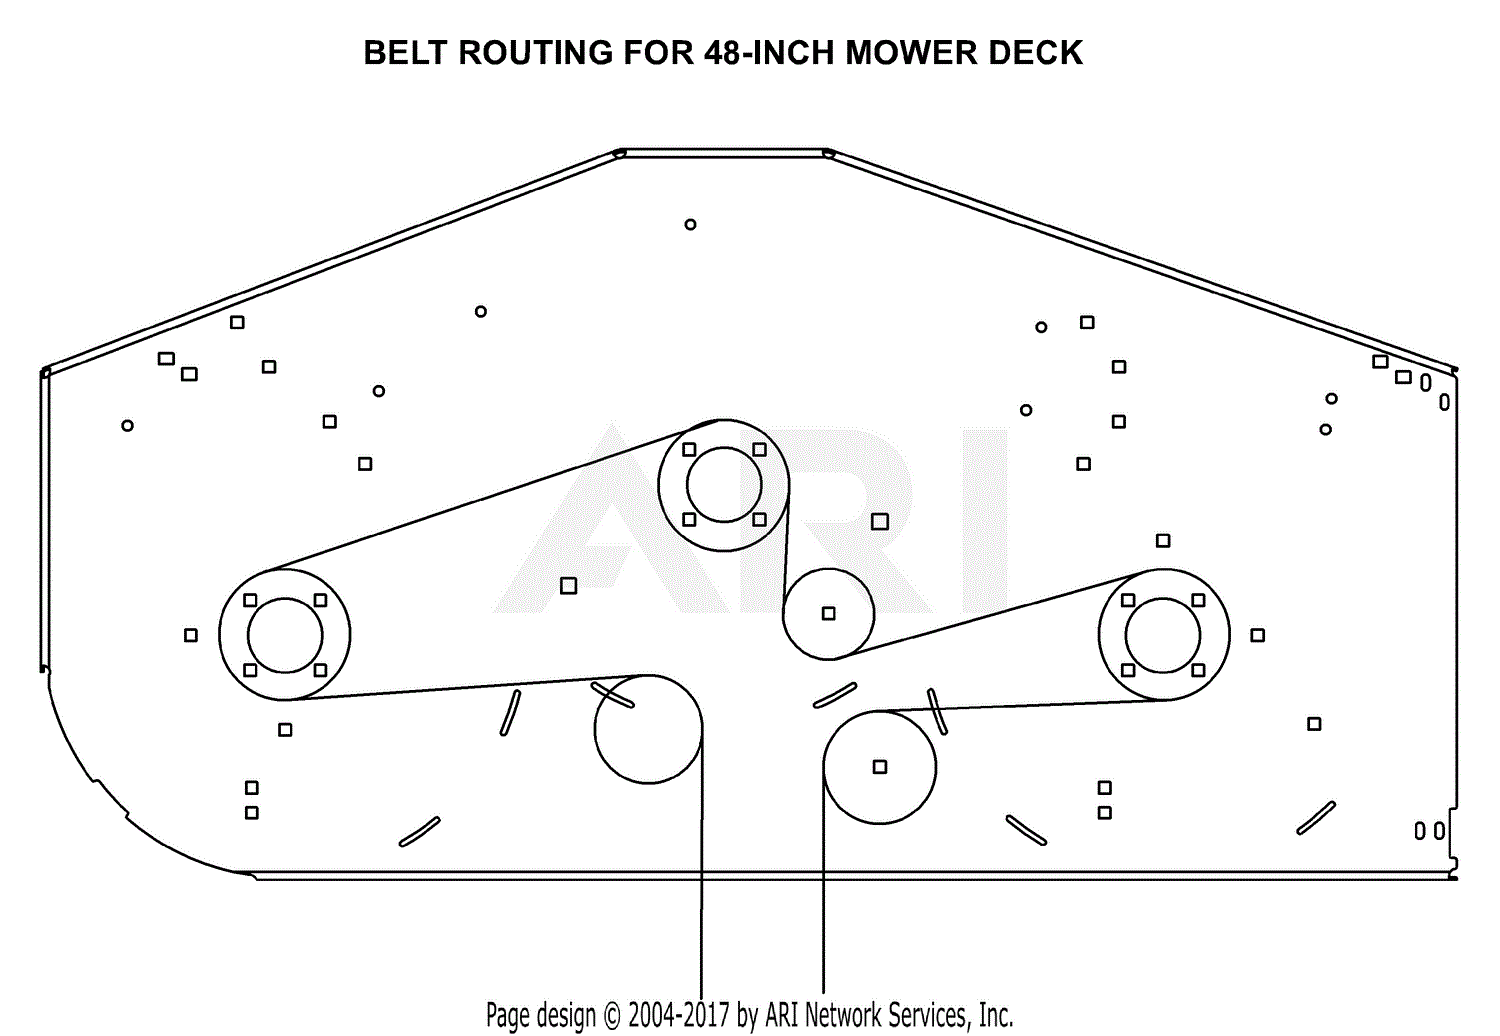 Gravely 515150 48 Zt Deck Kit Parts Diagram For Belt Routing For 48 Inch Mower Deck